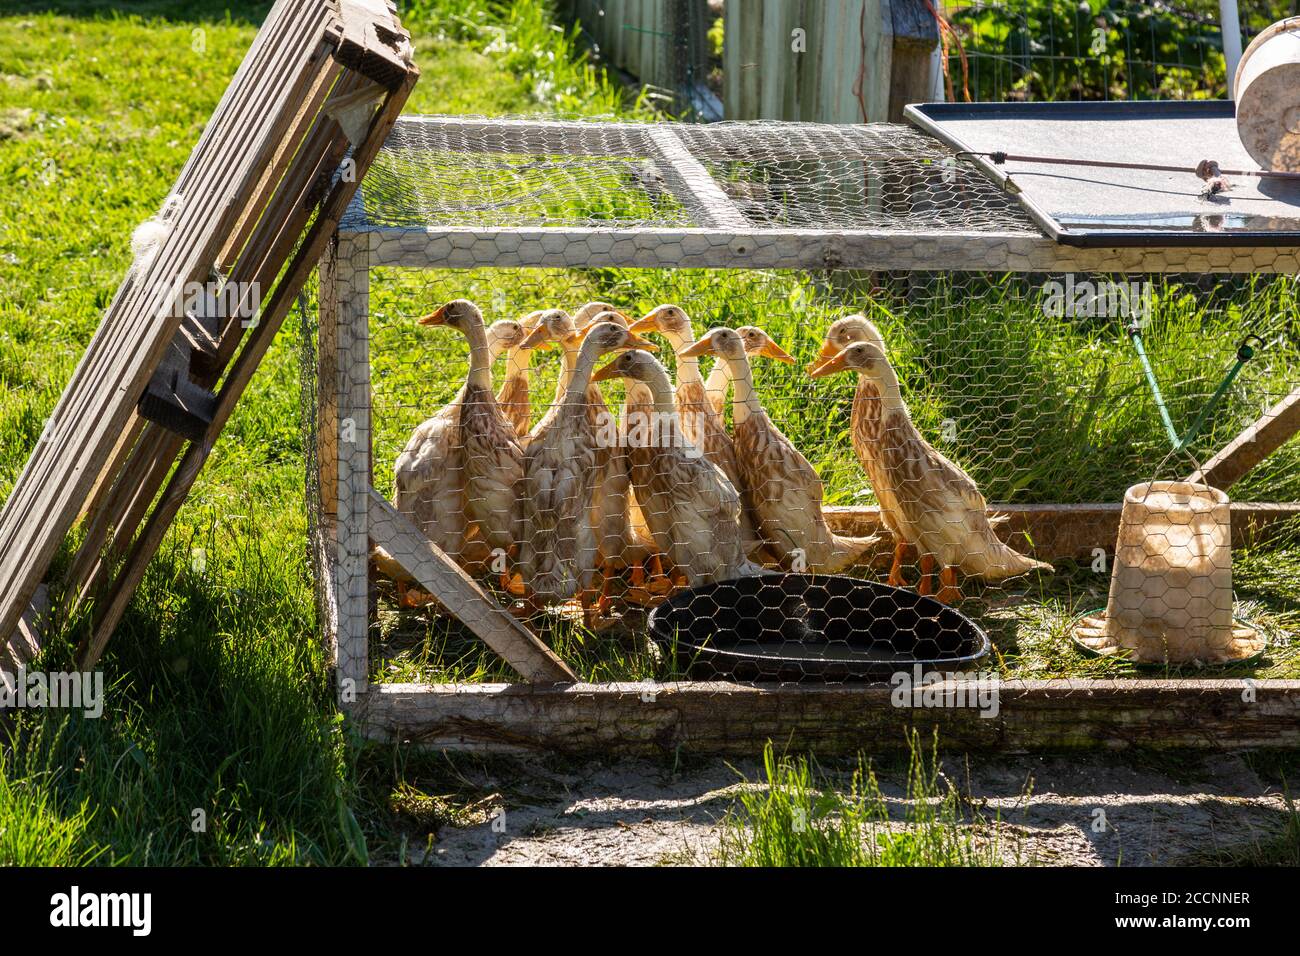 Indian Runner ducks in a cage on a DeKalb County farm near Spencerville, Indiana, USA. Stock Photo